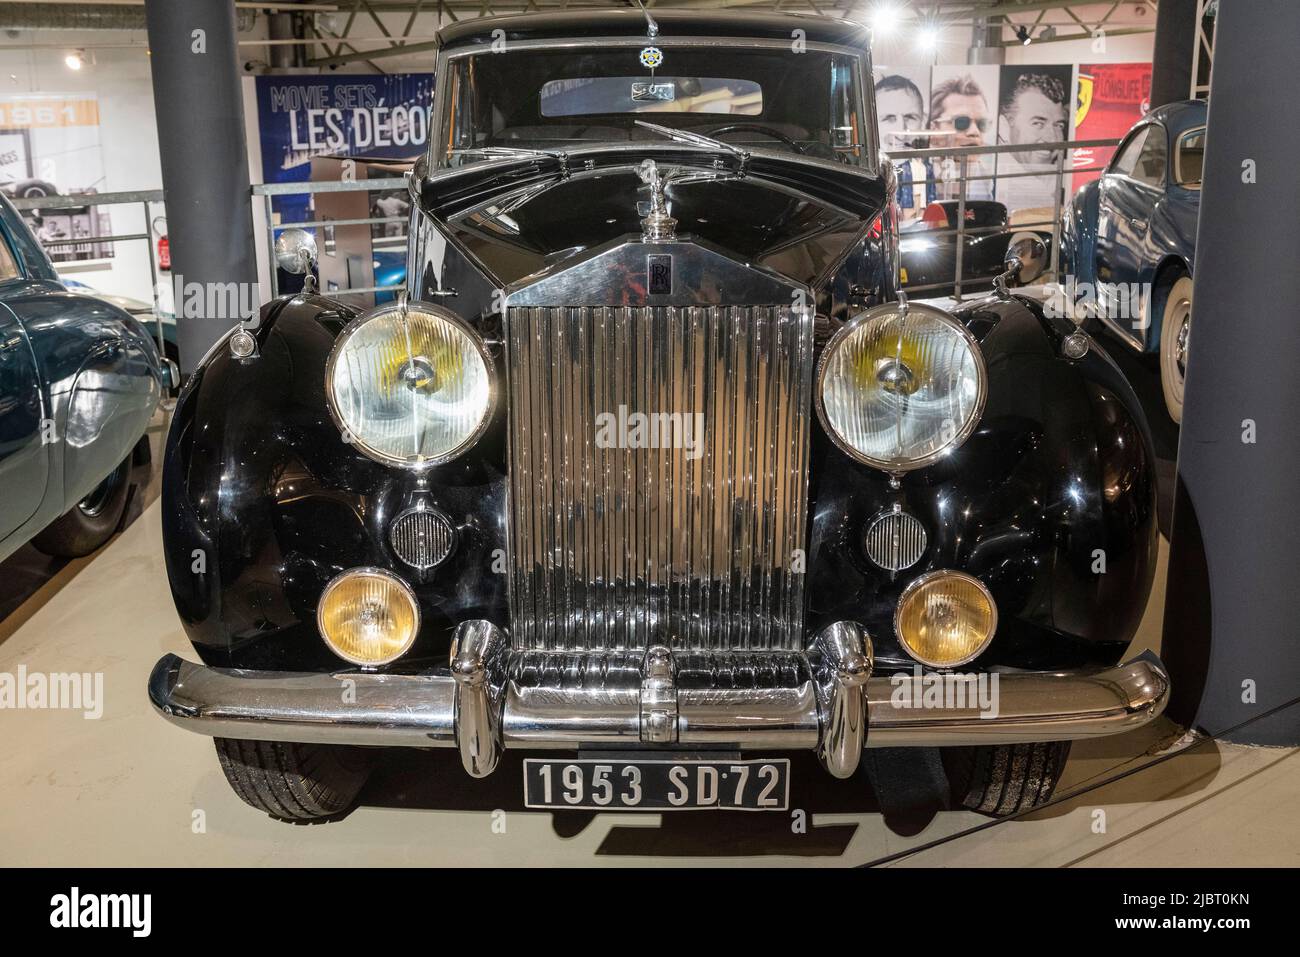 France, Sarthe, Le Mans, the automobile museum of Sarthe, Museum of the 24 hours of Le Mans, Rolls Royce Silver Wraith berline, 1953 Stock Photo